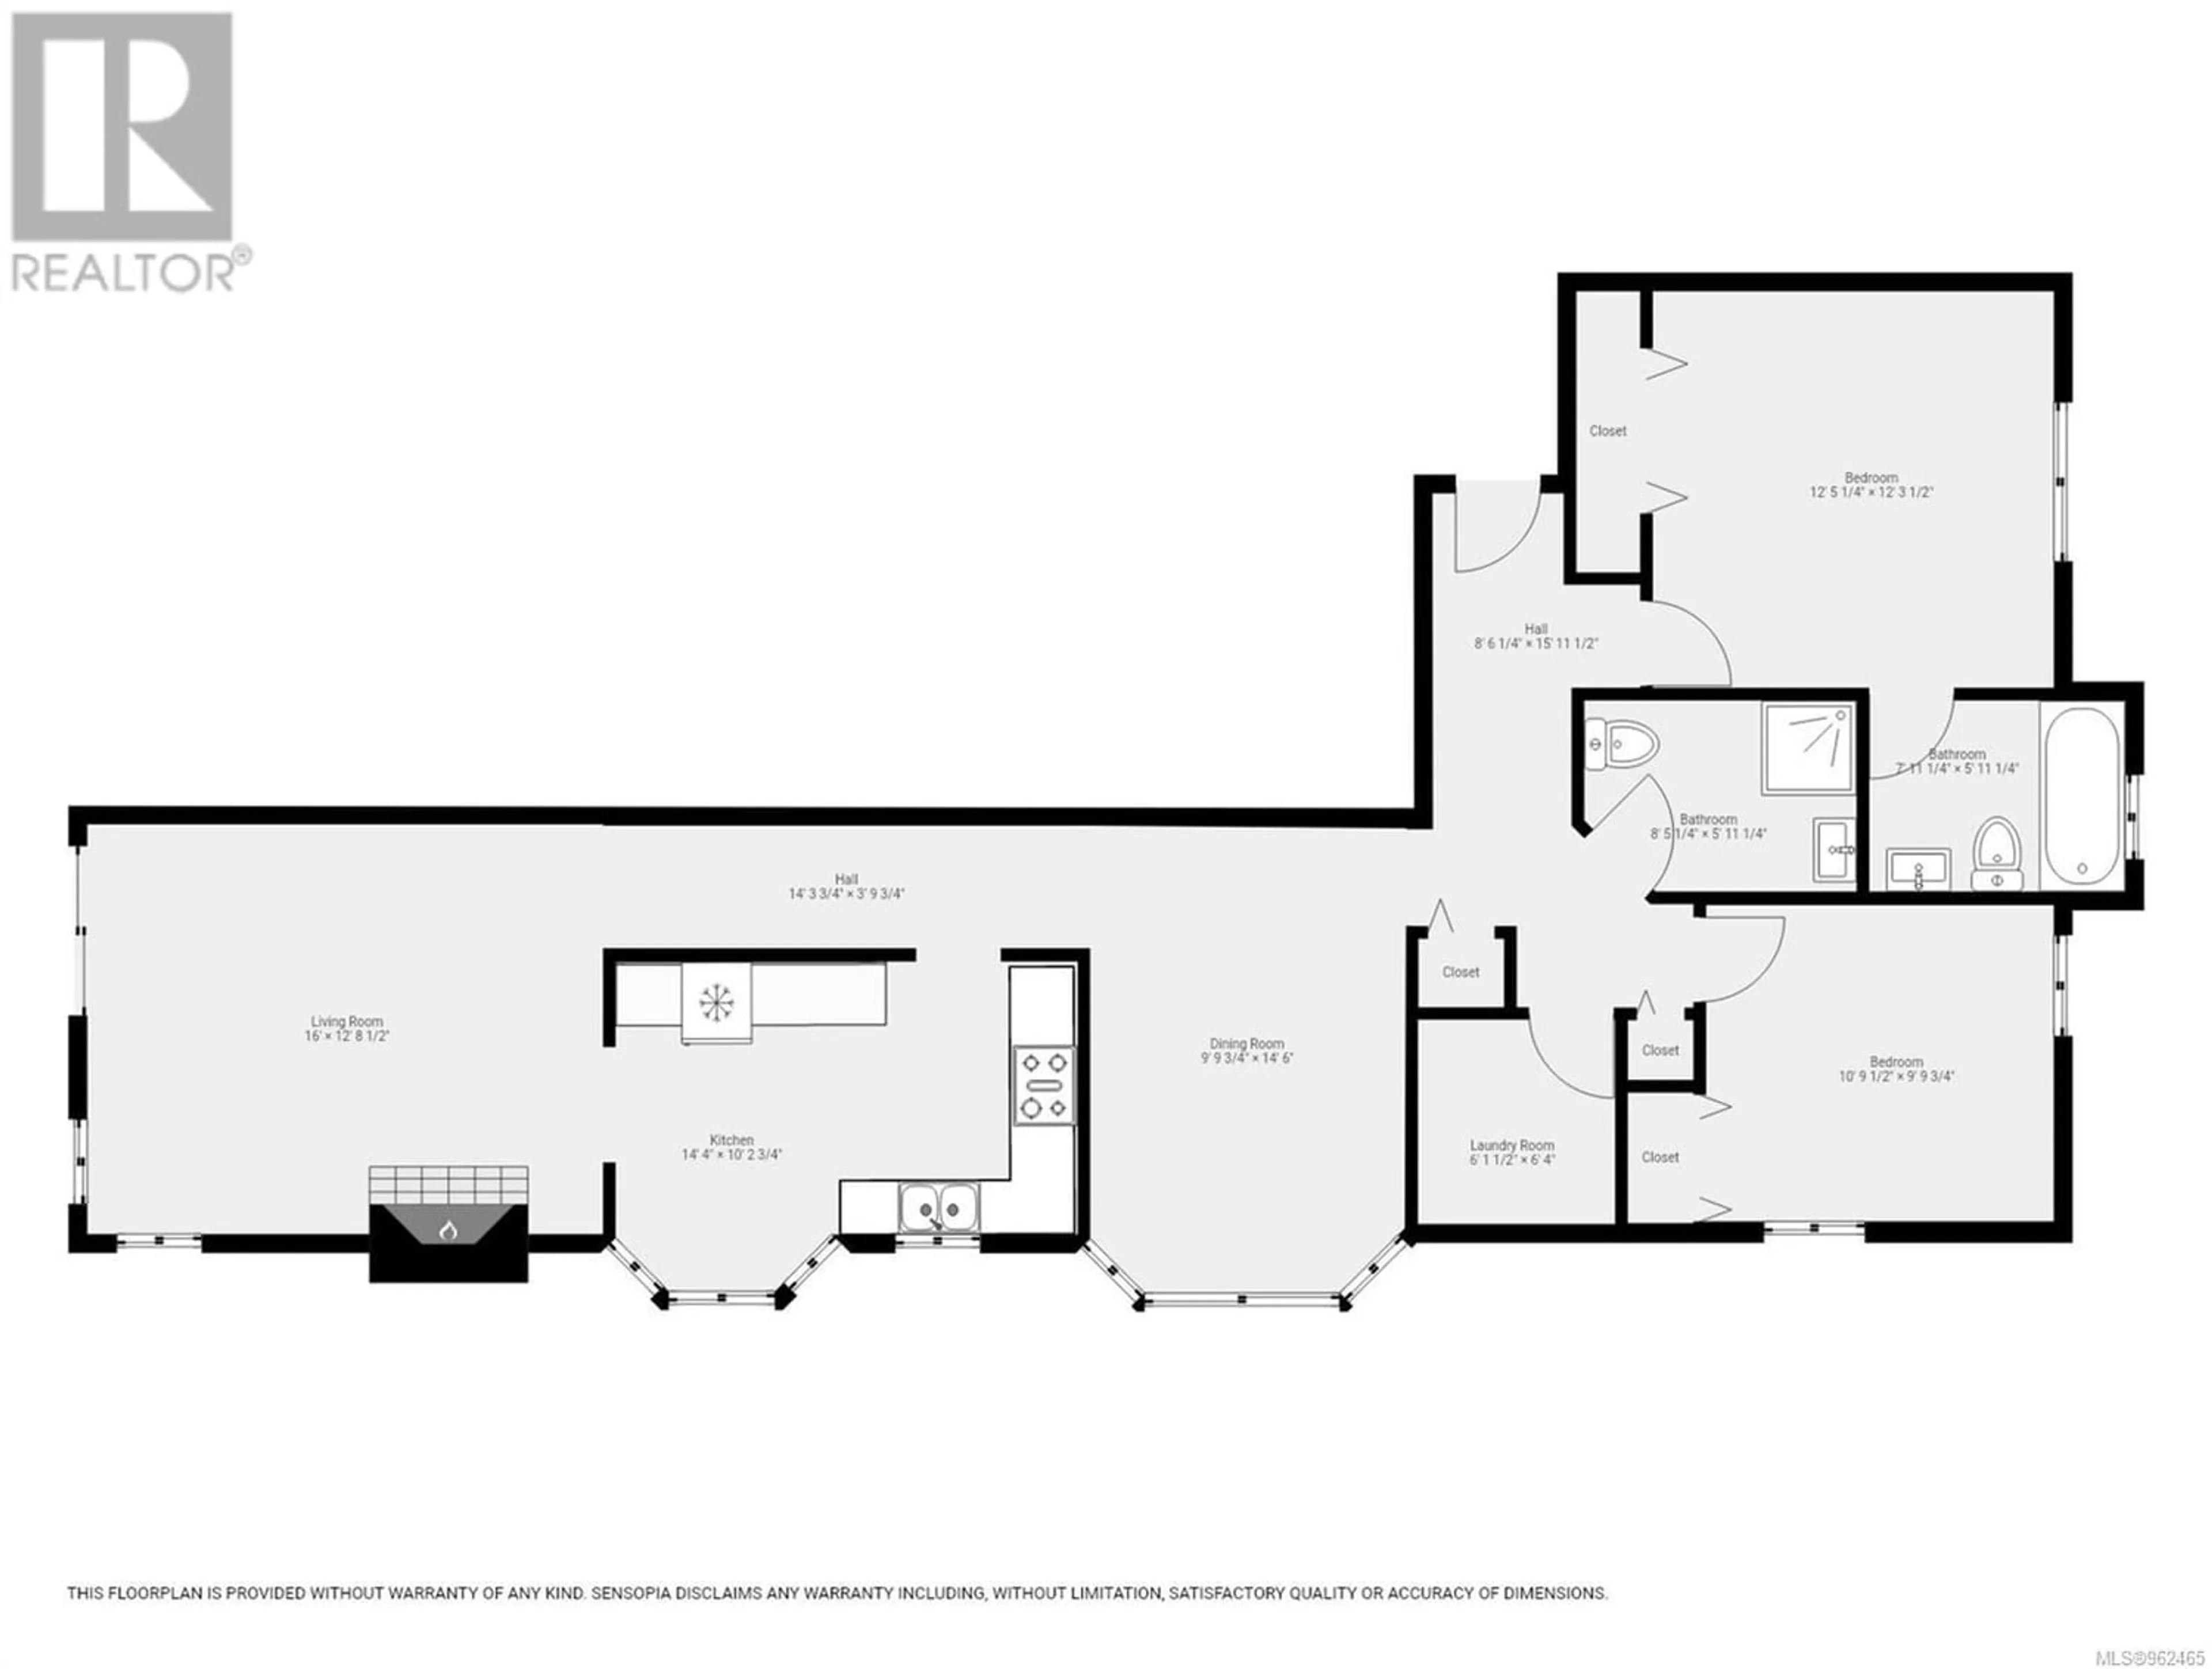 Floor plan for 308 1216 Island Hwy S, Campbell River British Columbia V9W1B5